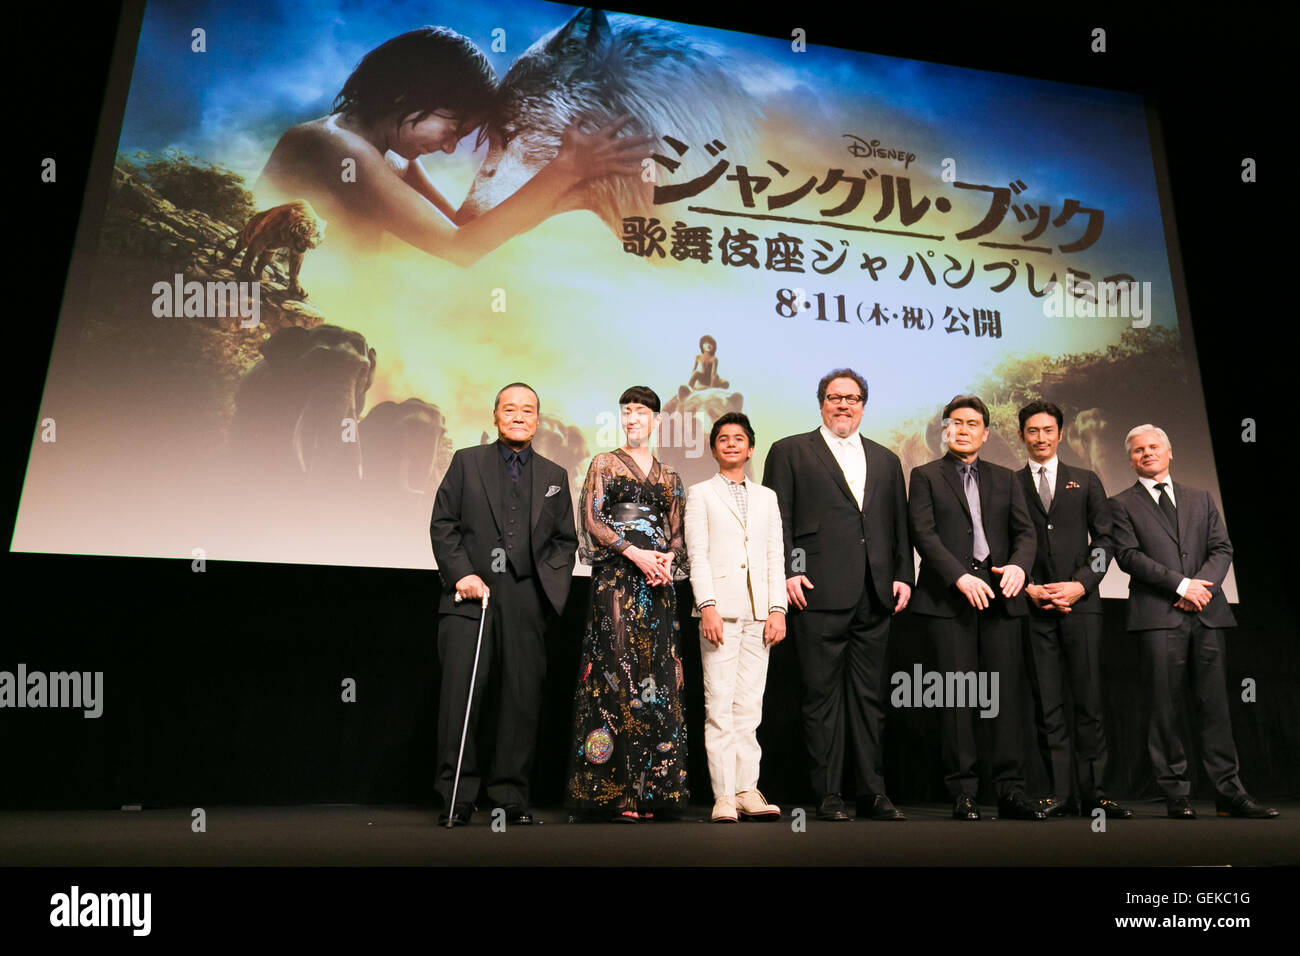 Tokyo, Japan. 27th July, 2016.  (L to R) Actor Toshiyuki Nishida, actress Rie Miyazawa, child actor Neel Sethi, director Jon Favreau, actor Matsumoto Koshiro, actor Yusuke Iseya and producer Brigham Taylor pose for the cameras during the Japanese premiere for the film The Jungle Book at Kabuki-za theater in Ginza on July 27, 2016, Tokyo, Japan. Sethi, Taylor and Japanese voice cast appeared on the stage to greet the fans. The movie will be released in Japan on August 11. Credit:  Rodrigo Reyes Marin/AFLO/Alamy Live News Stock Photo